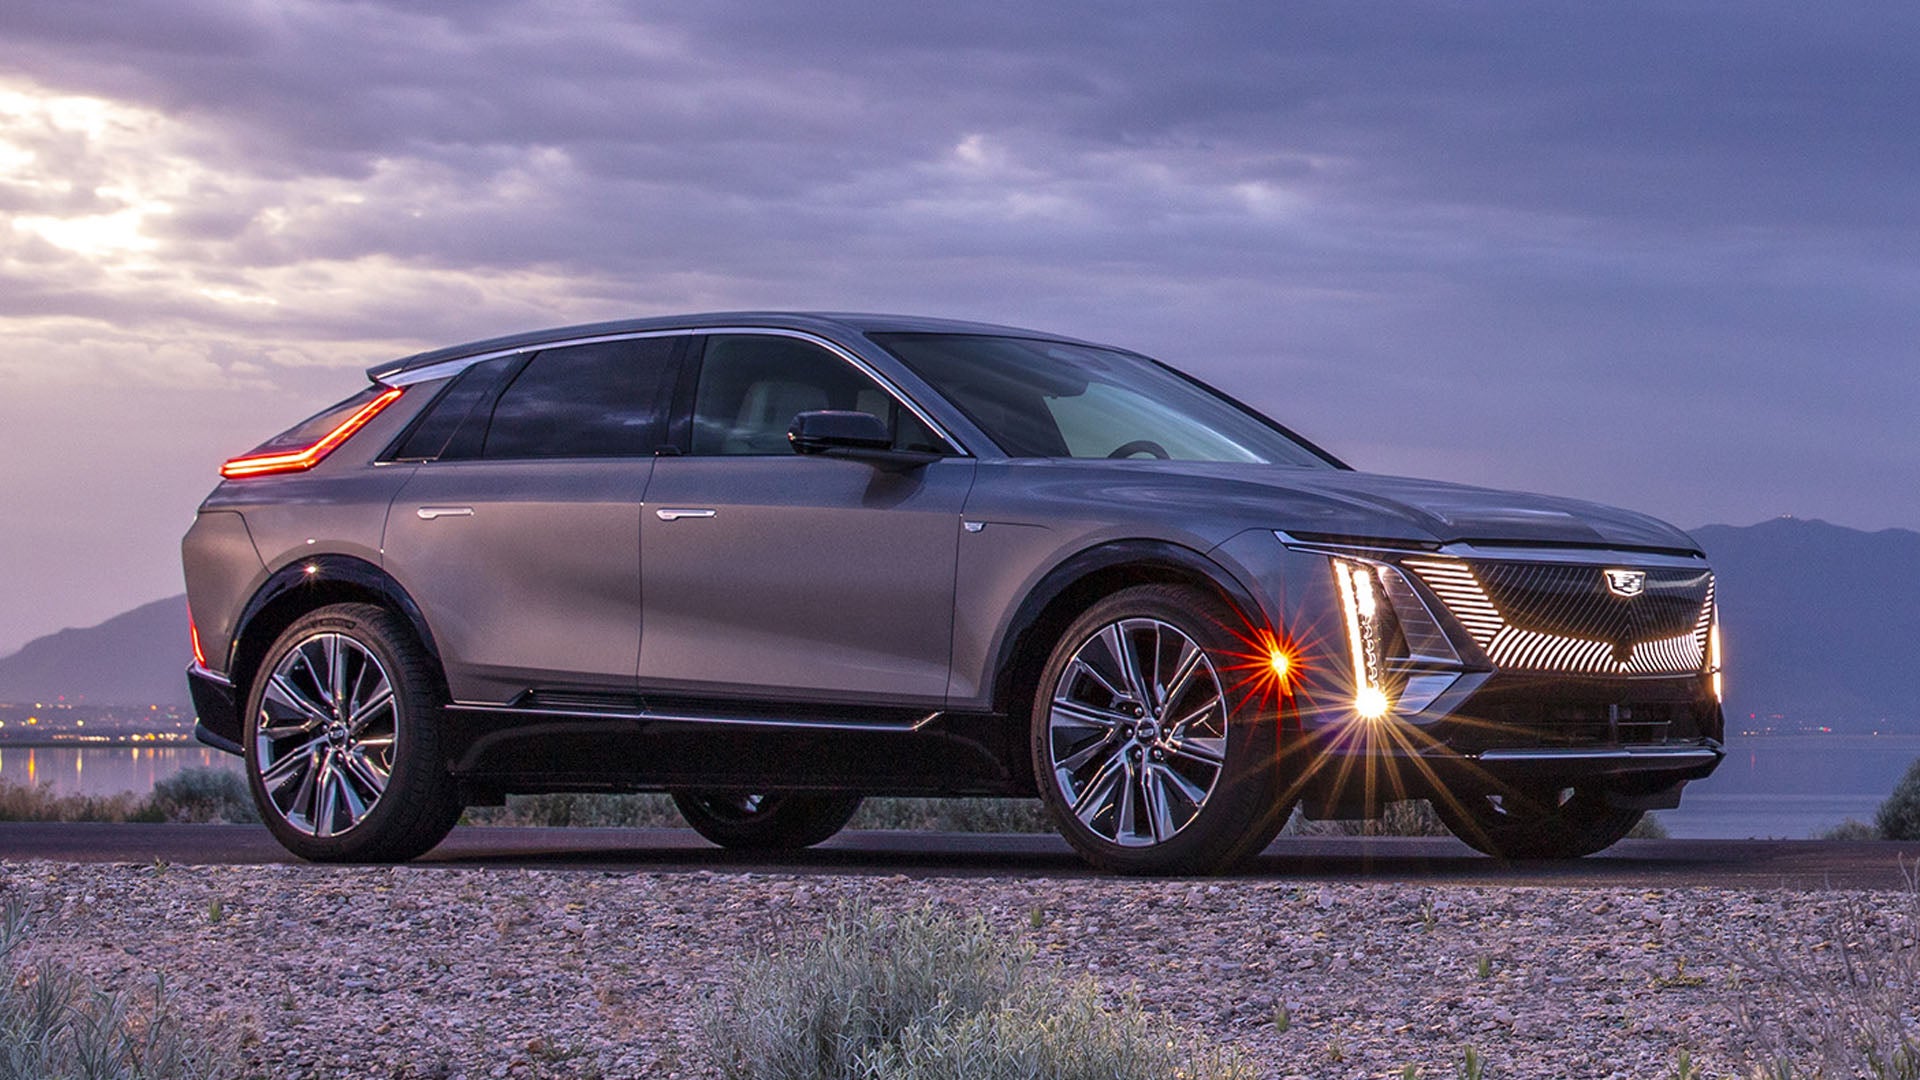 2023 Cadillac Lyriq Denied EV Tax Credit Because Feds Say It’s Not an SUV